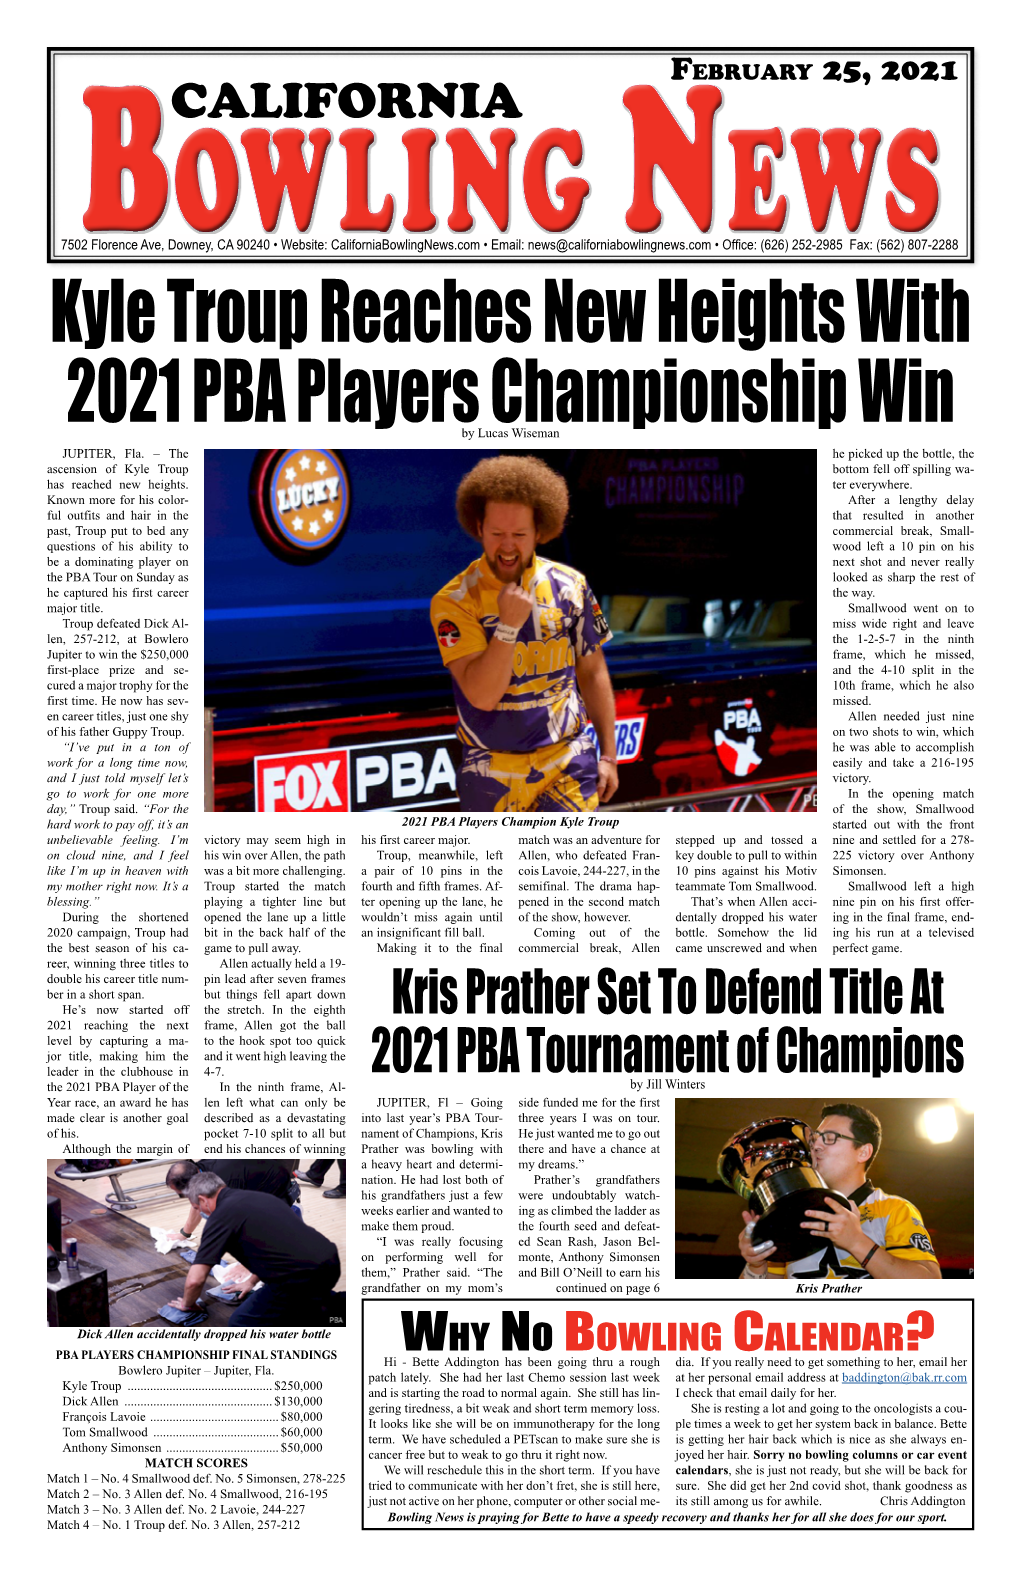 Kyle Troup Reaches New Heights with 2021 PBA Players